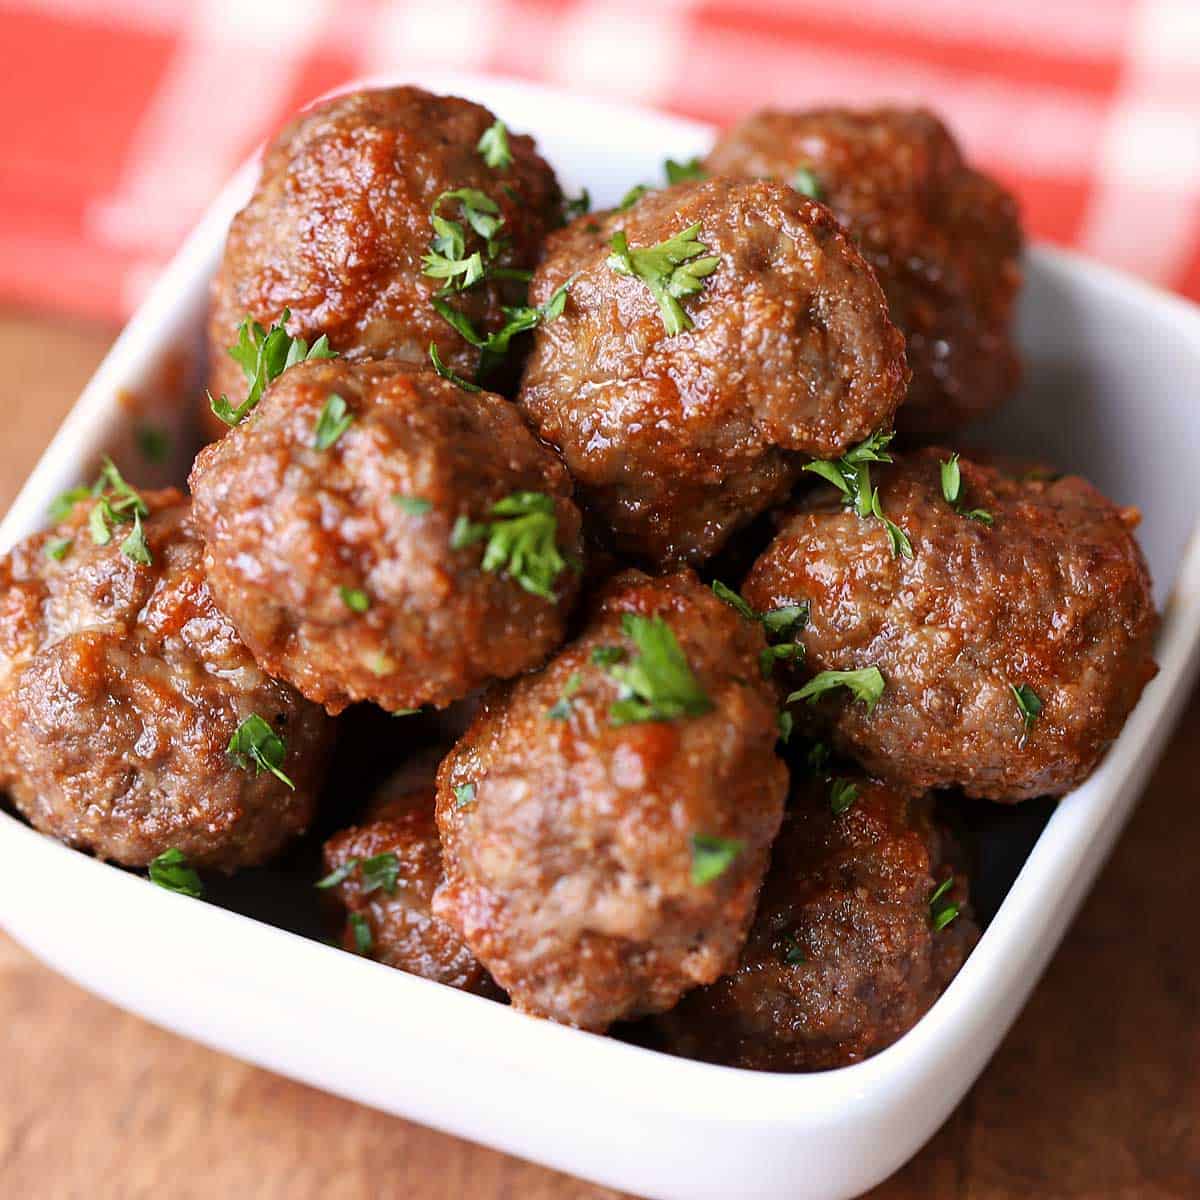 Meatballs without breadcrumbs